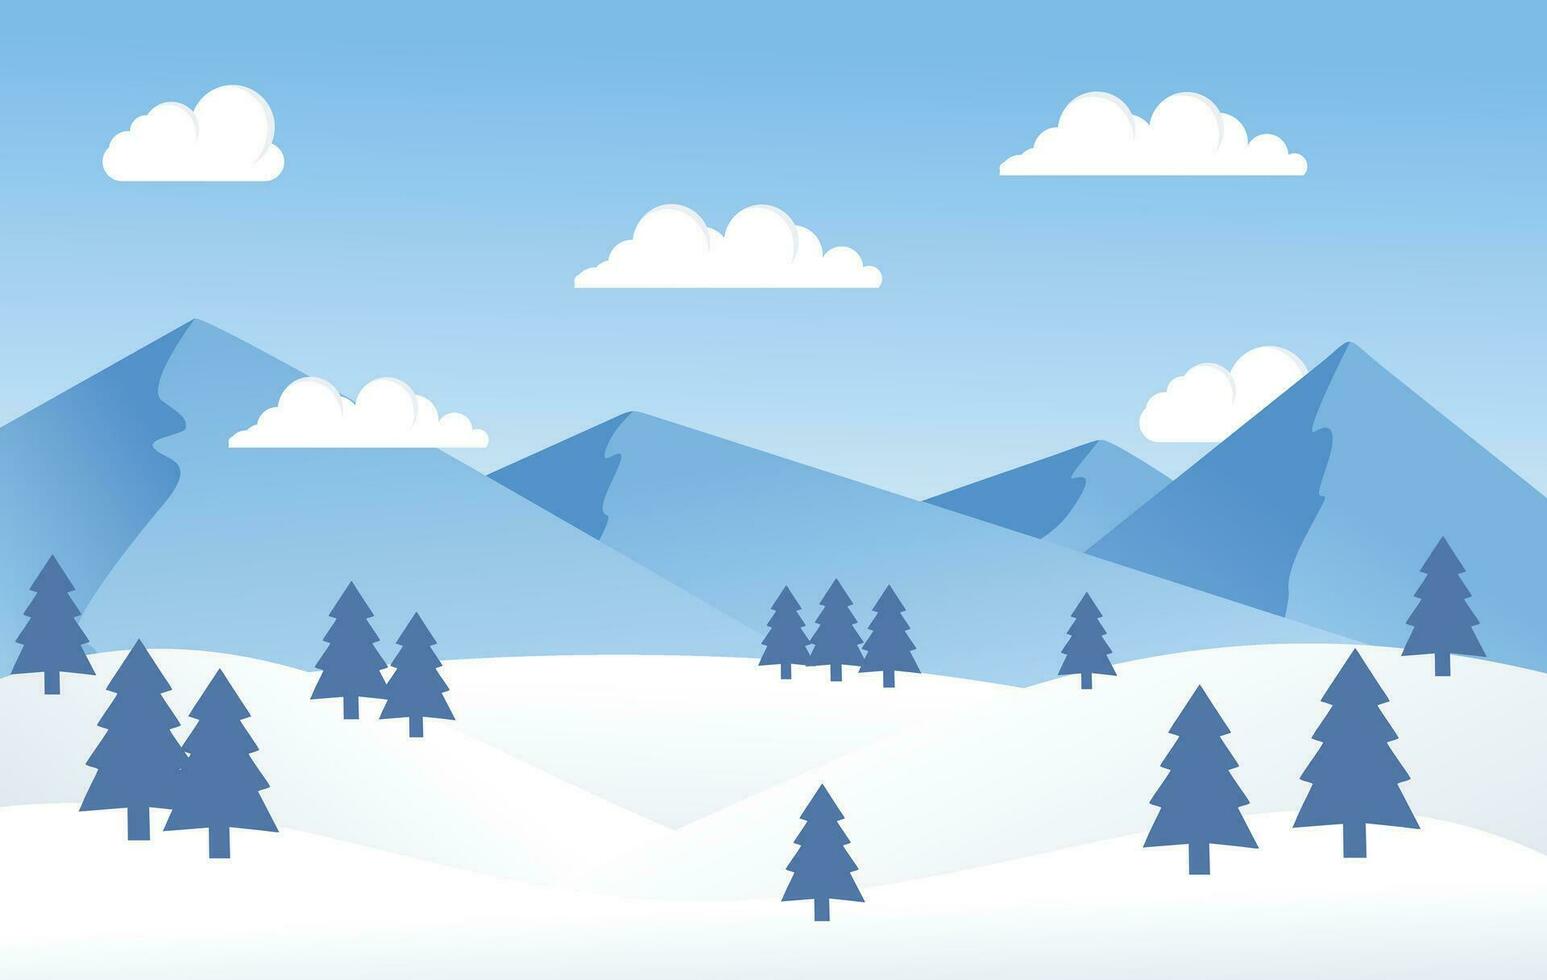 Winter mountain landscape illustration, vector background with winter snow theme, flat design style, vector illustration of snow hills, clouds and trees